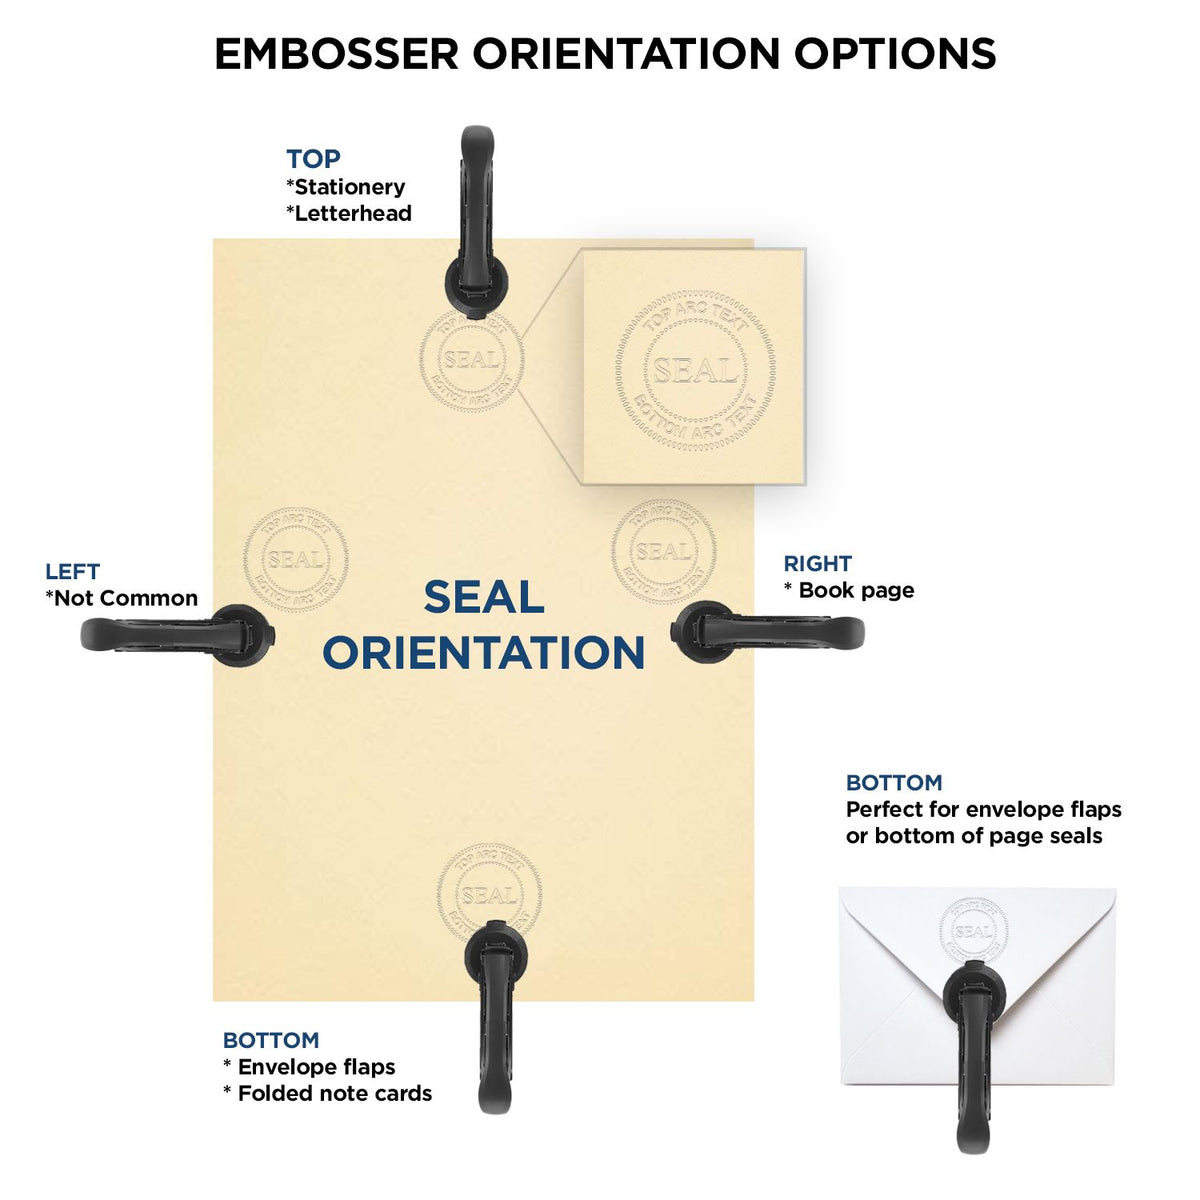 An infographic for the State of New Jersey Long Reach Architectural Embossing Seal showing embosser orientation, this is showing examples of a top, bottom, right and left insert.